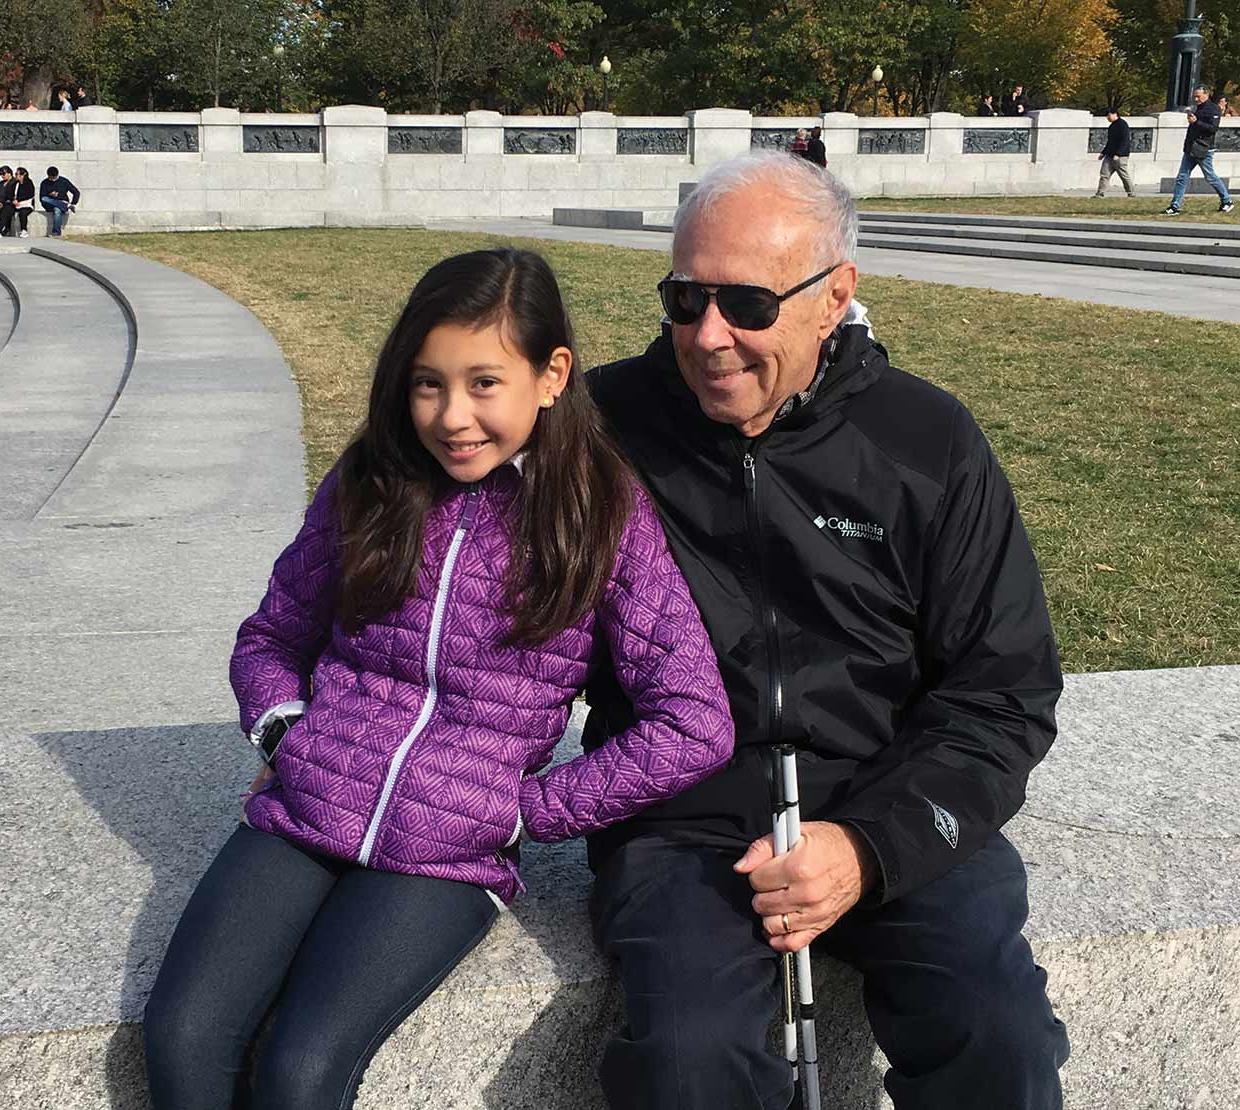 John Gardner with grand daughter sitting in a park